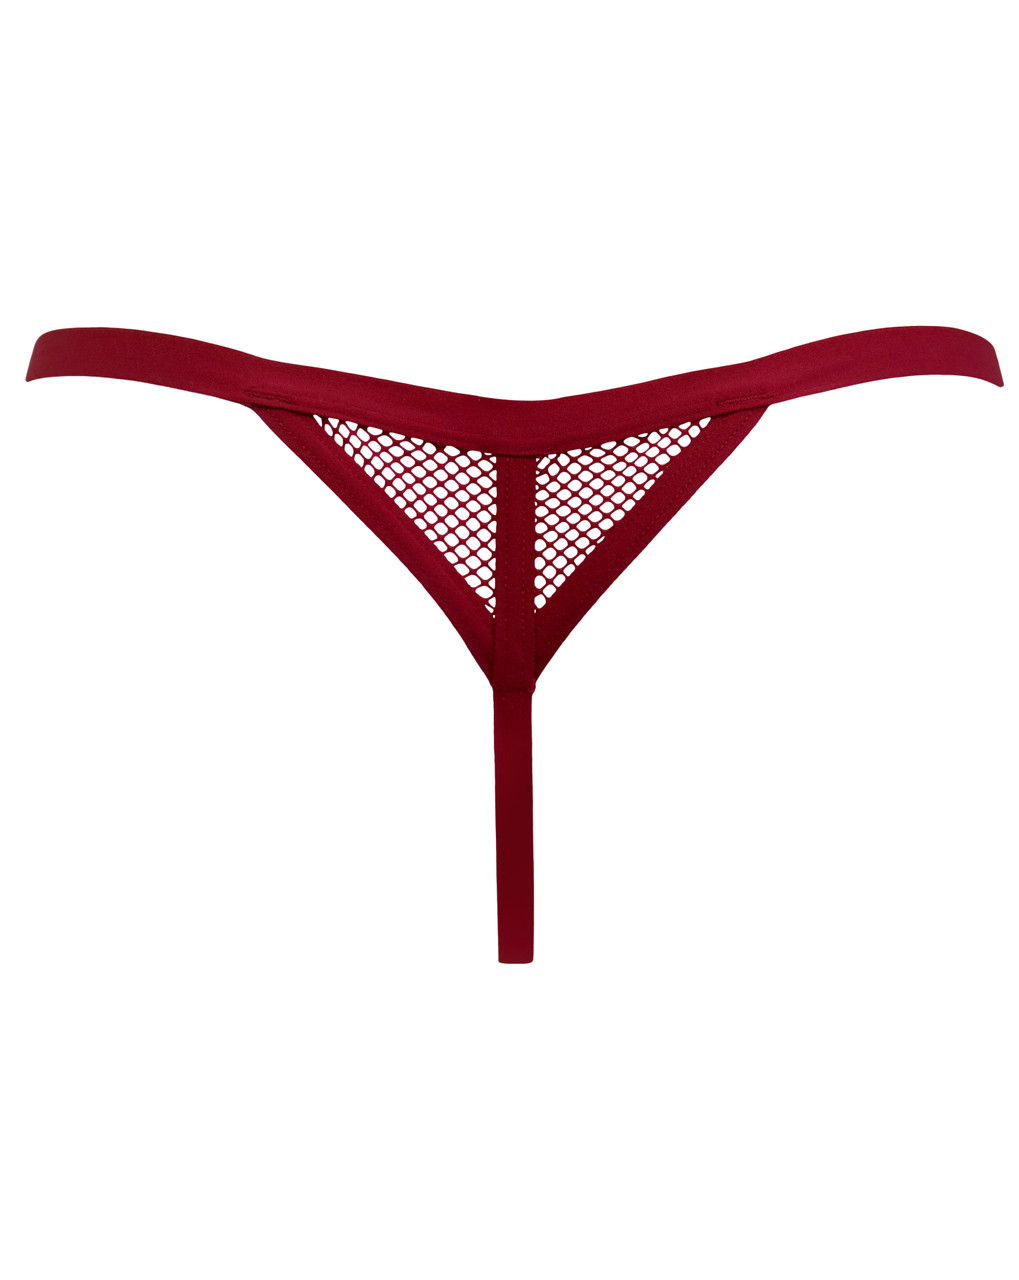 Pour Moi Dark Romance Thong in Red/Black FINAL SALE NORMALLY $26 - Busted  Bra Shop